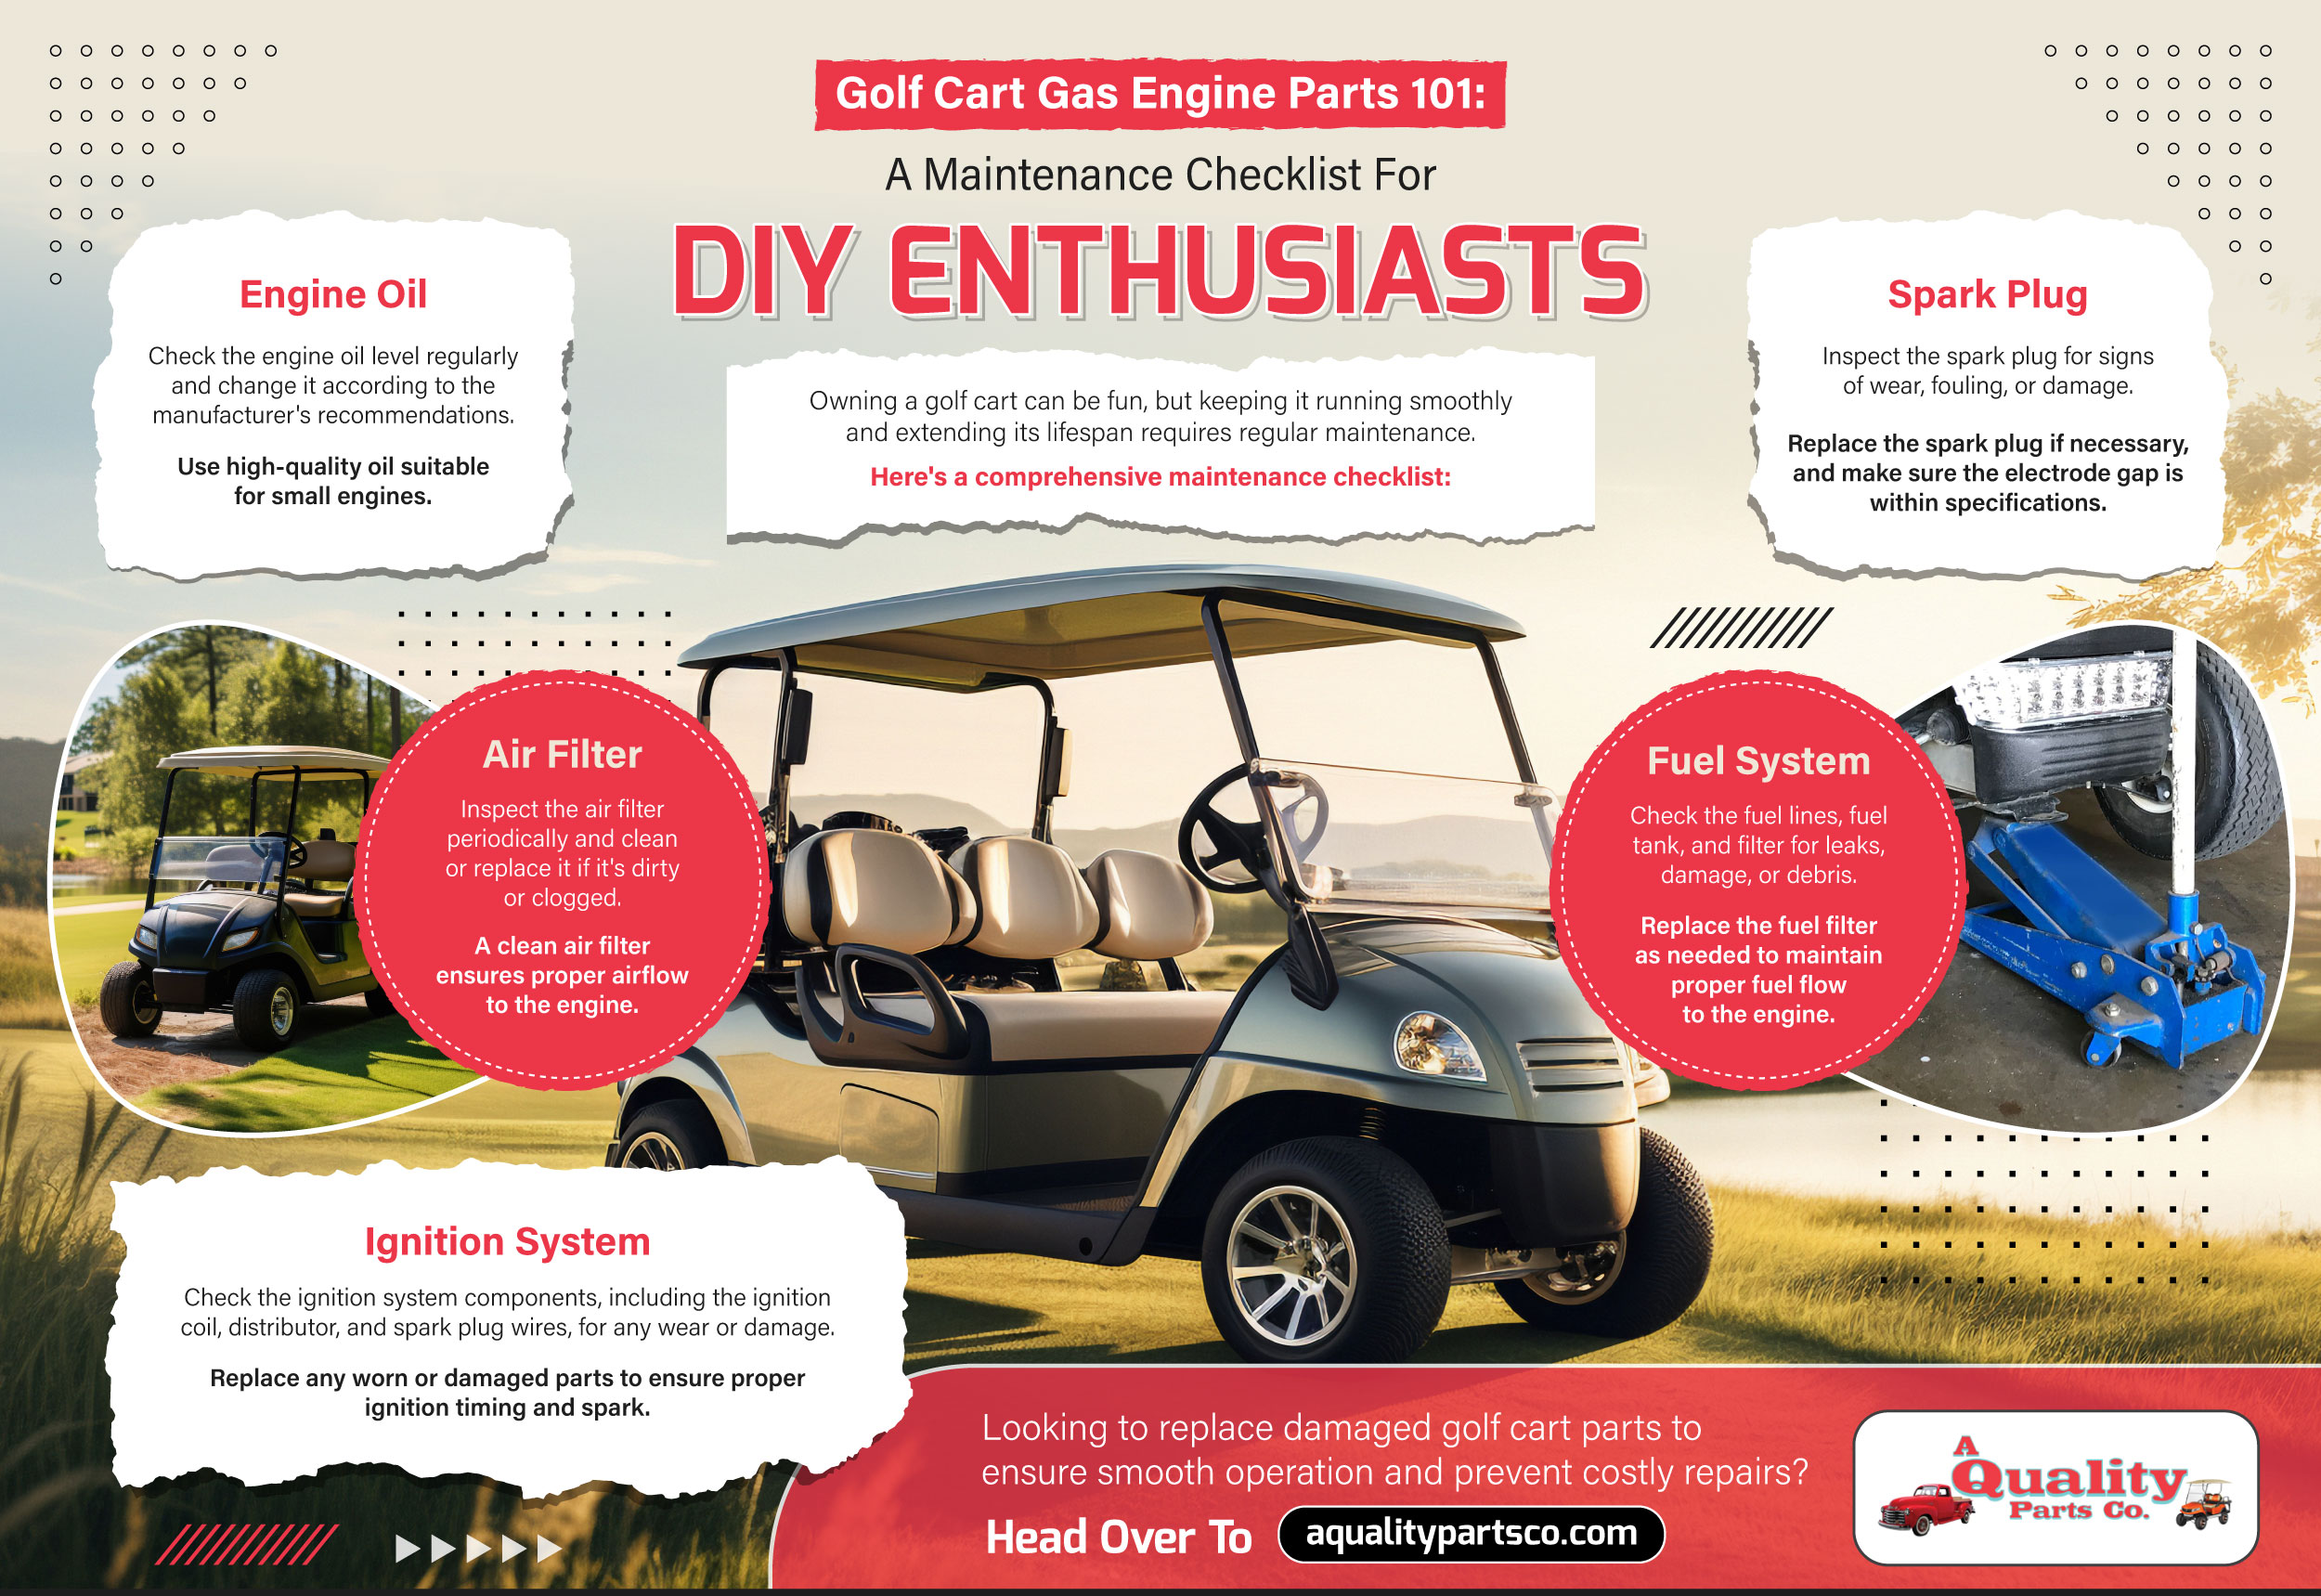 Golf Cart Gas Engine Parts 101: A Maintenance Checklist for DIY Enthusiasts